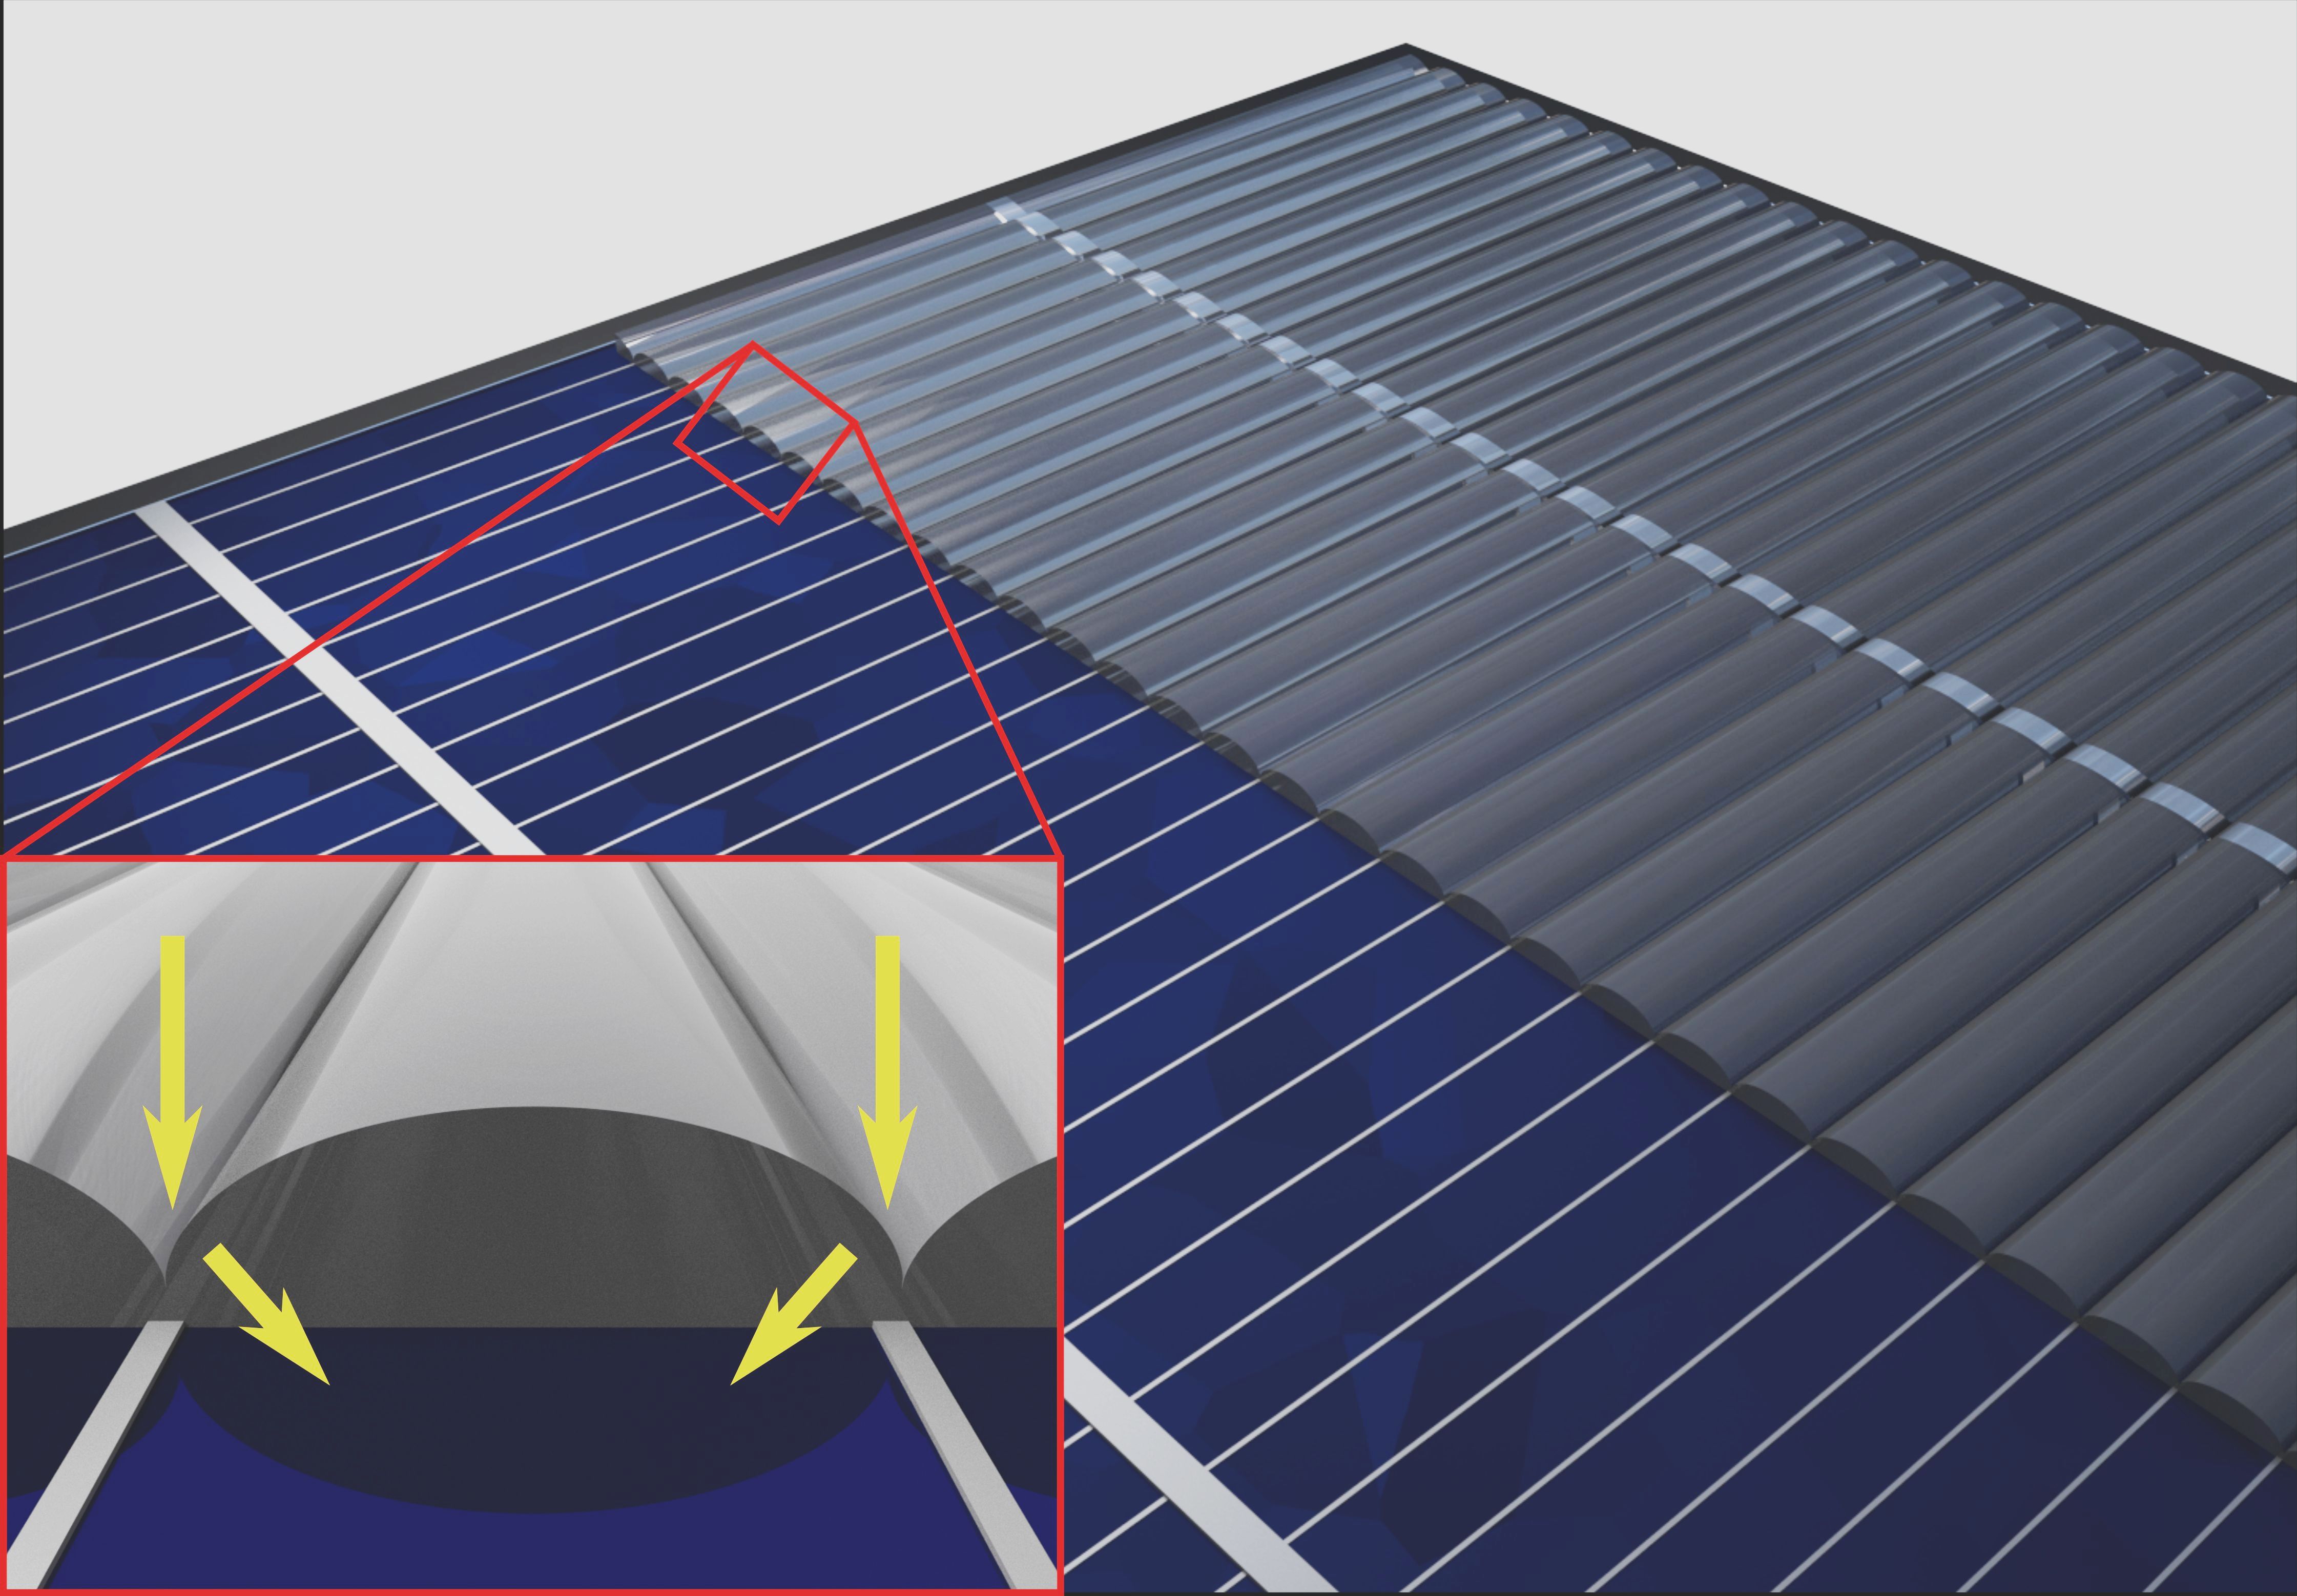 invisibility-cloaks-are-coming-for-solar-panels